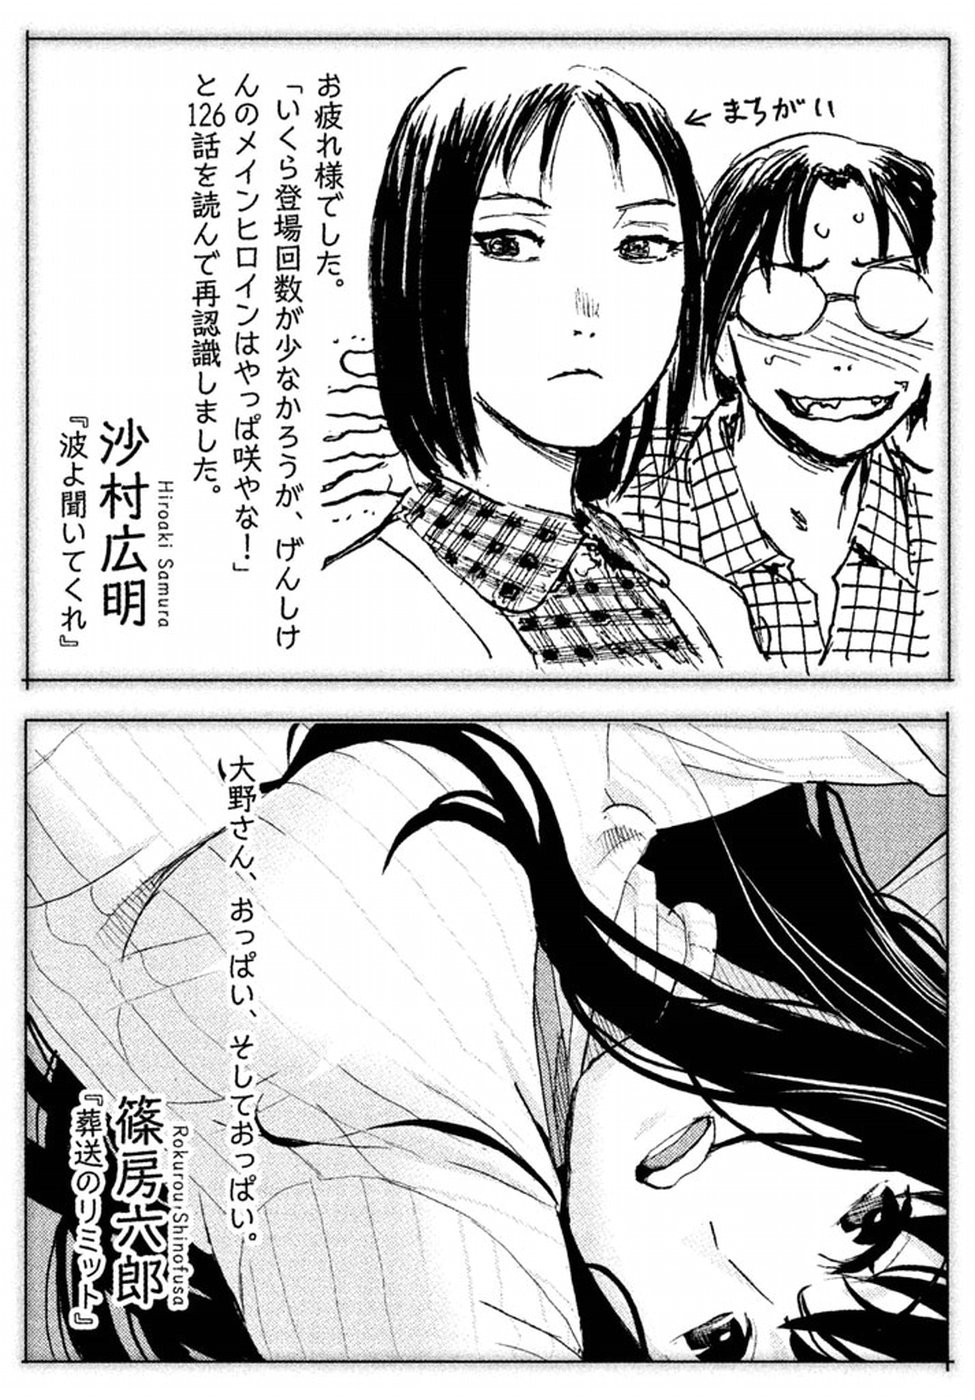 Genshiken - Chapter 127.5 - Page 9